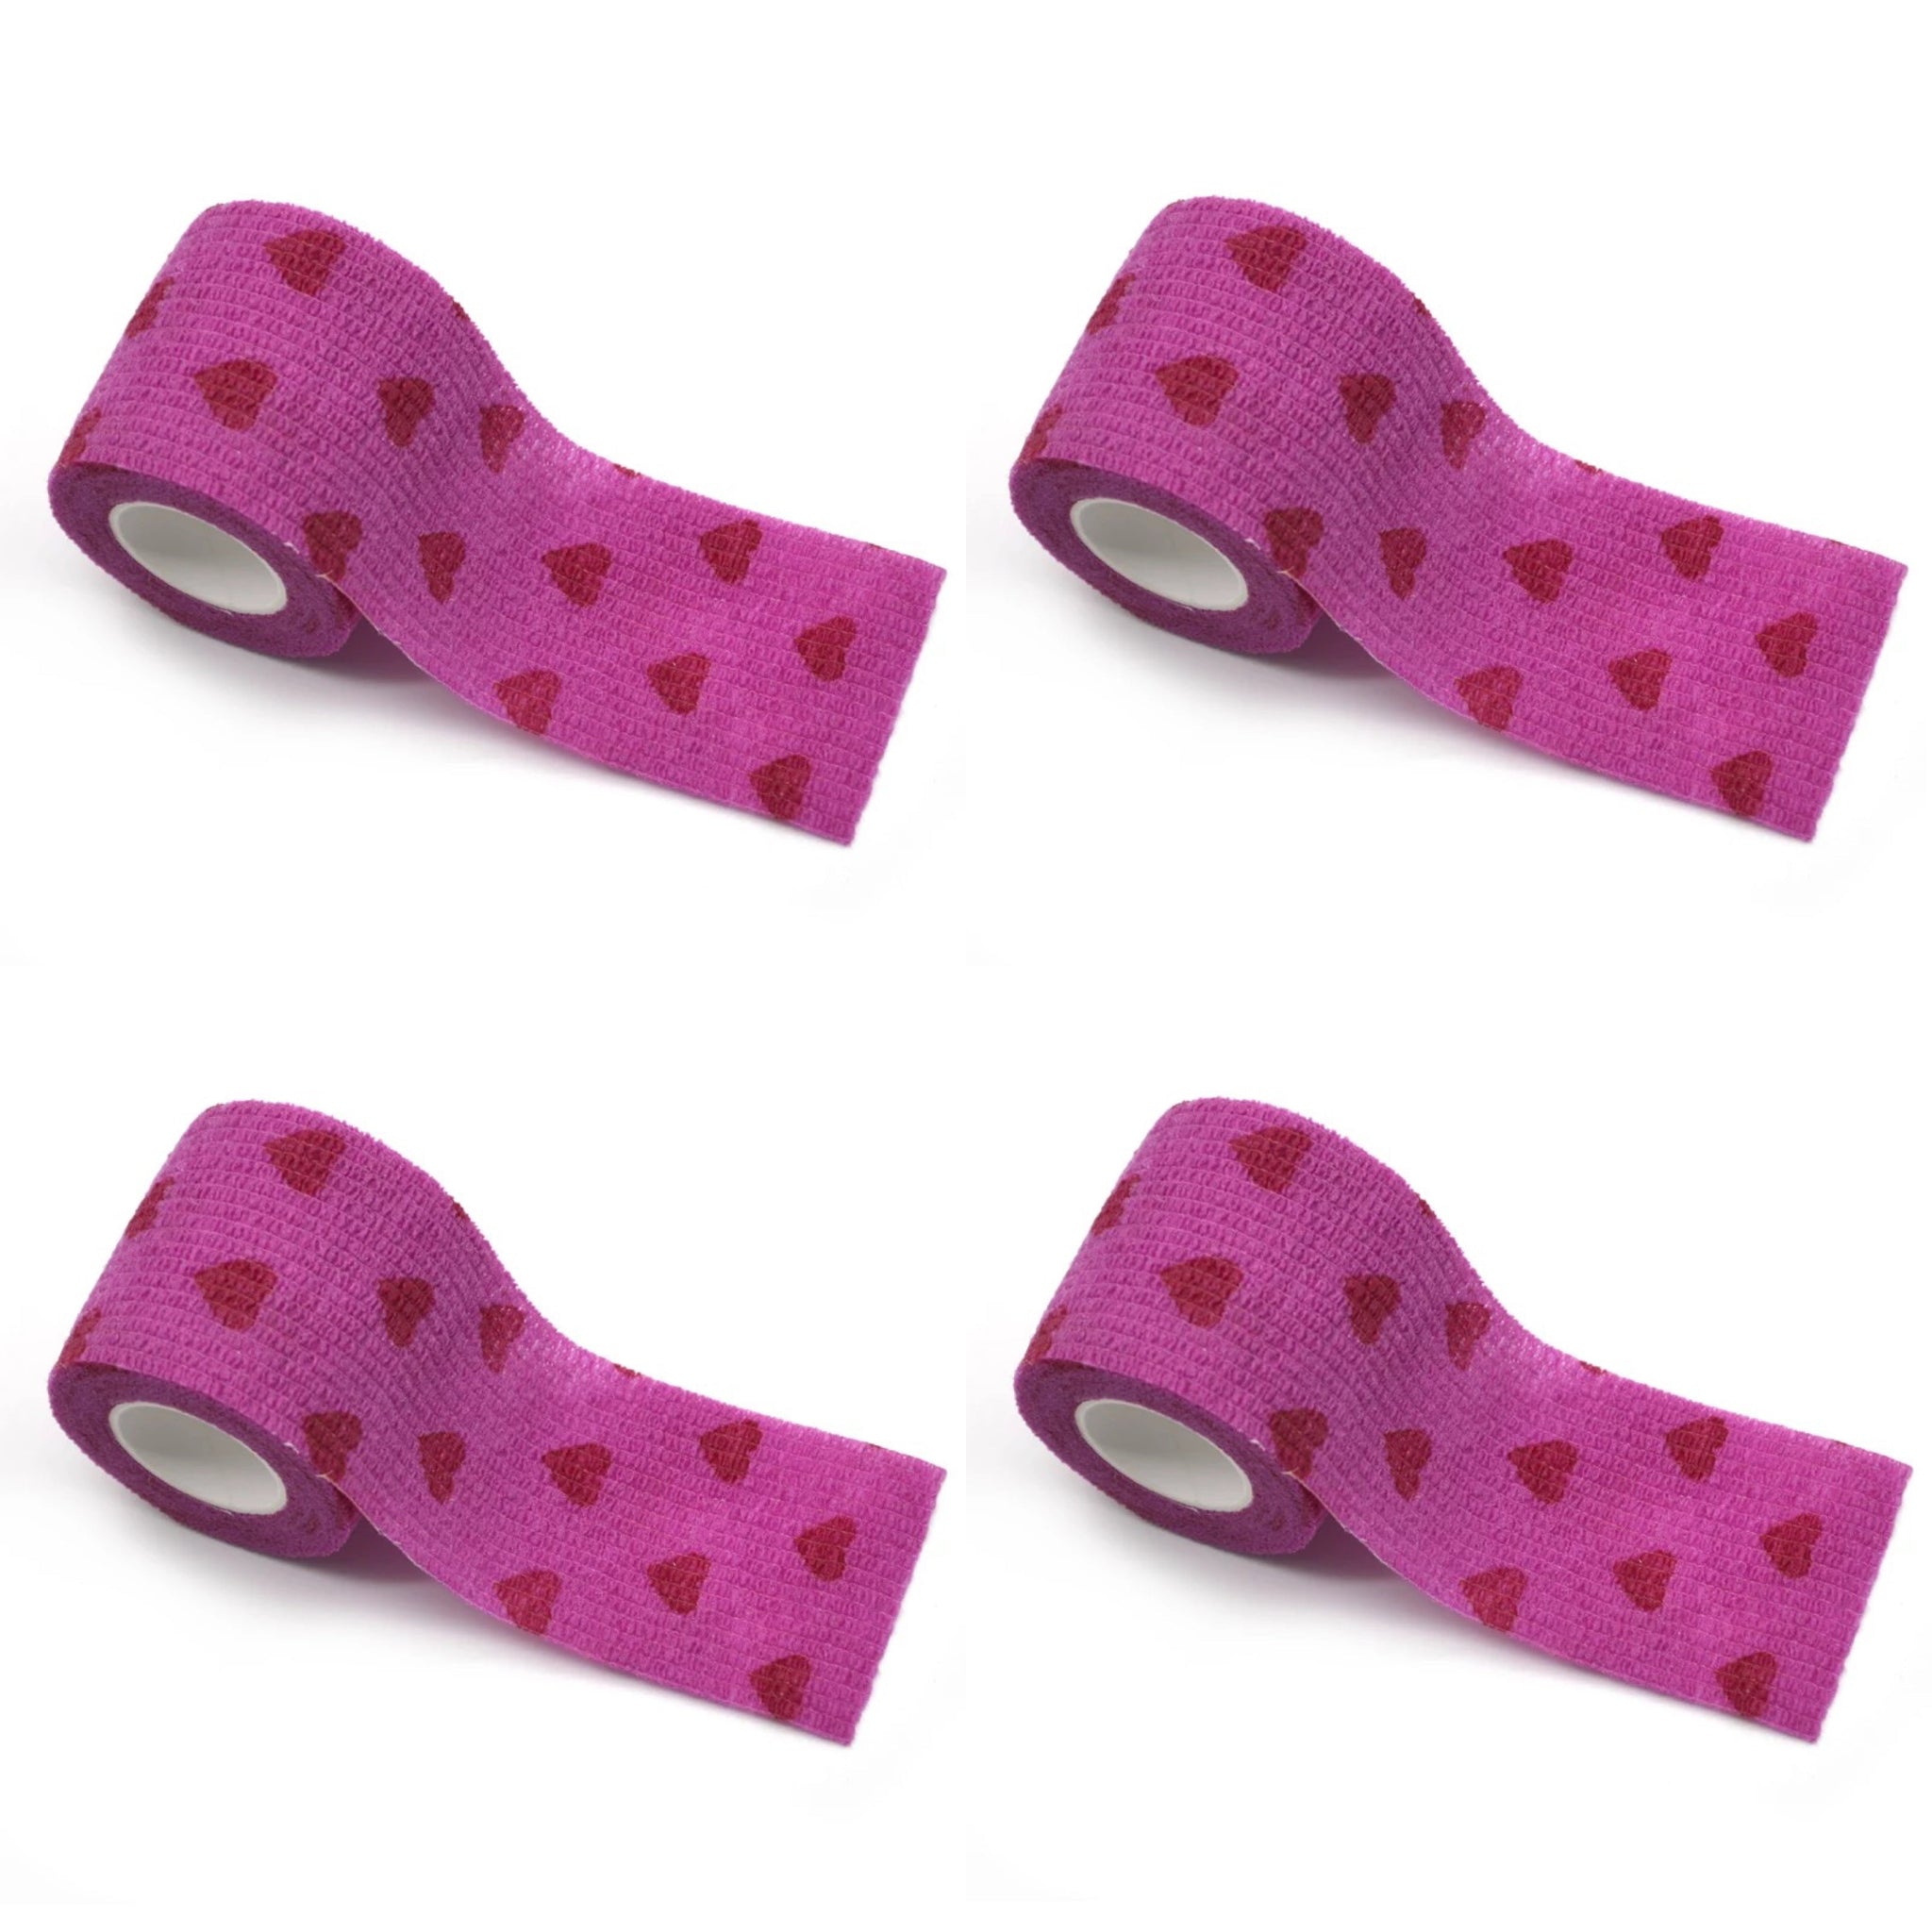 PINK/PURPLE Hearts Hand Piece Wrap 4 Pack